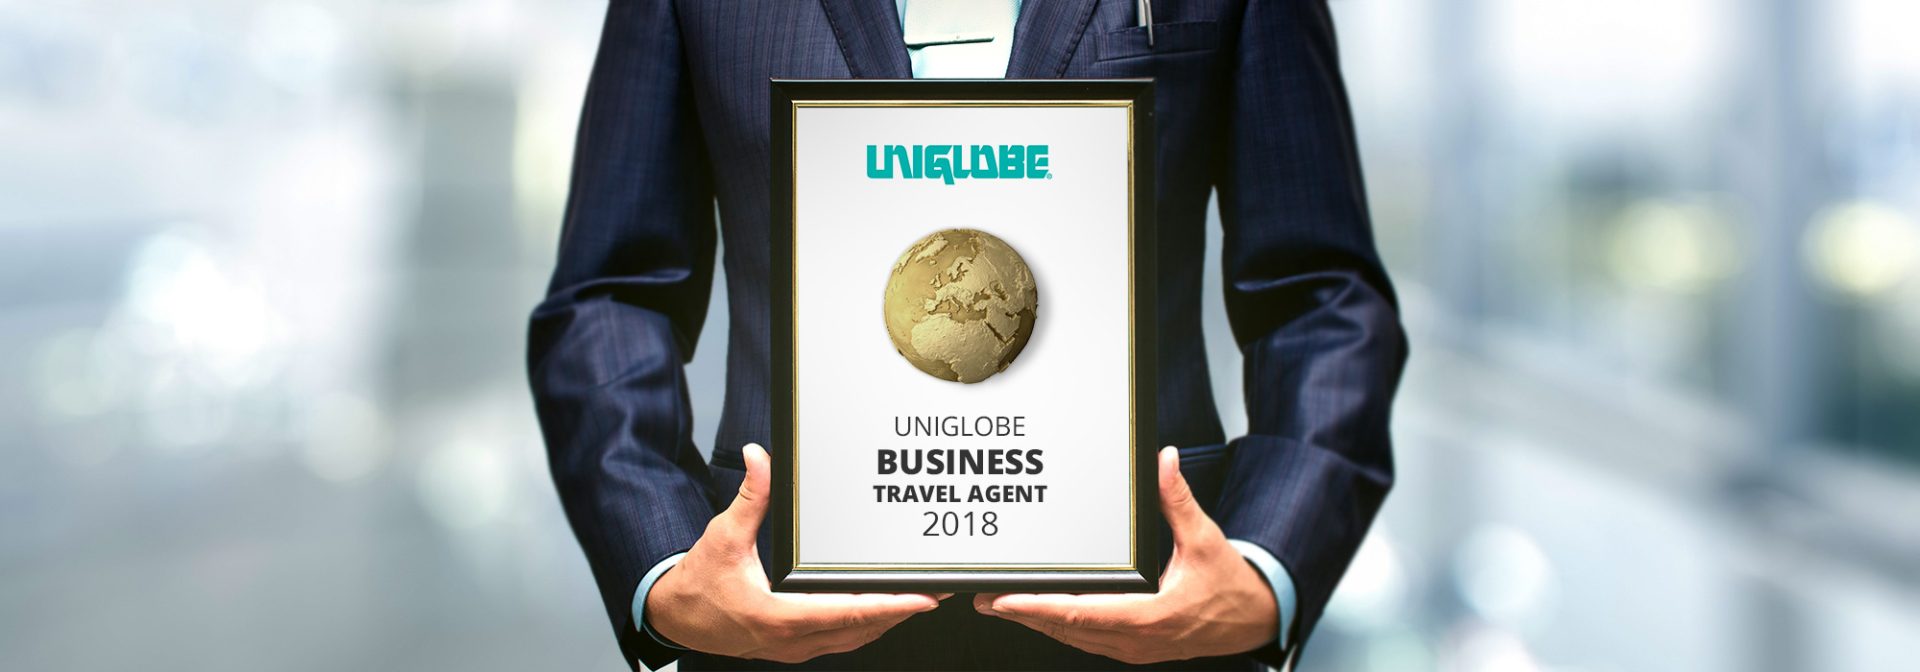 Uniglobe Gemini Announced As Business Travel Agent Of The Year